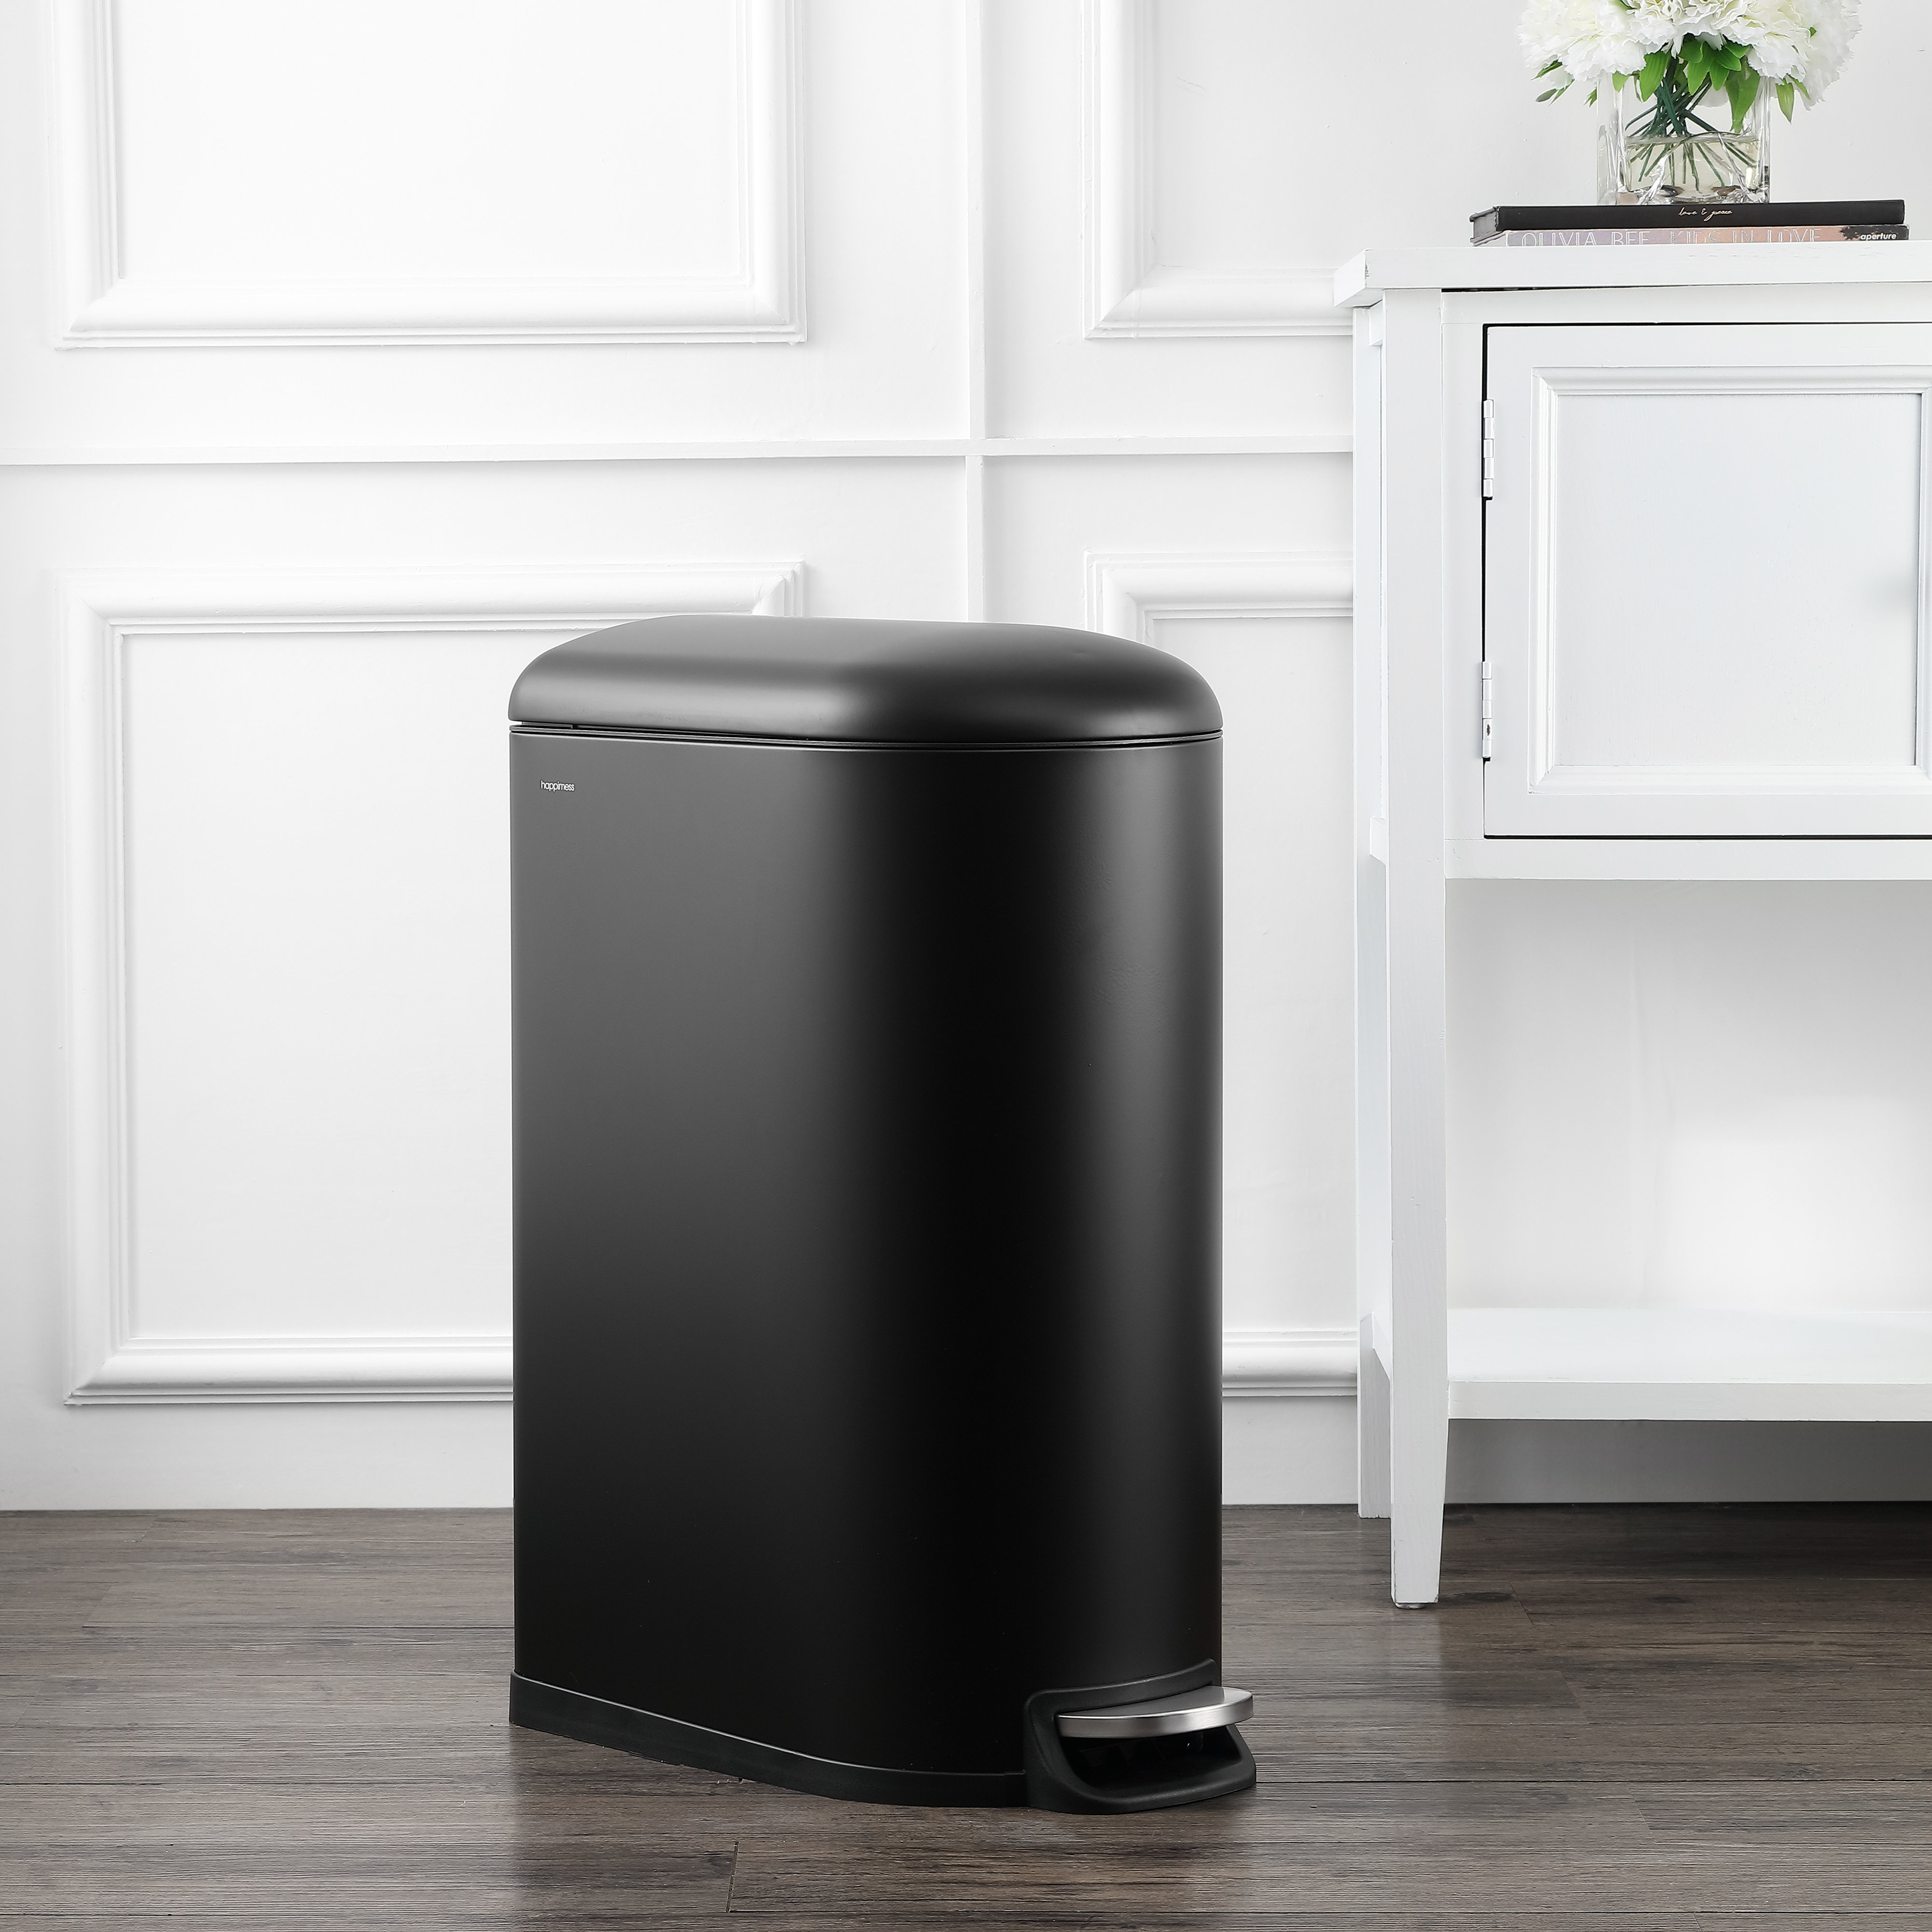 Top Rated Kitchen Trash Cans 